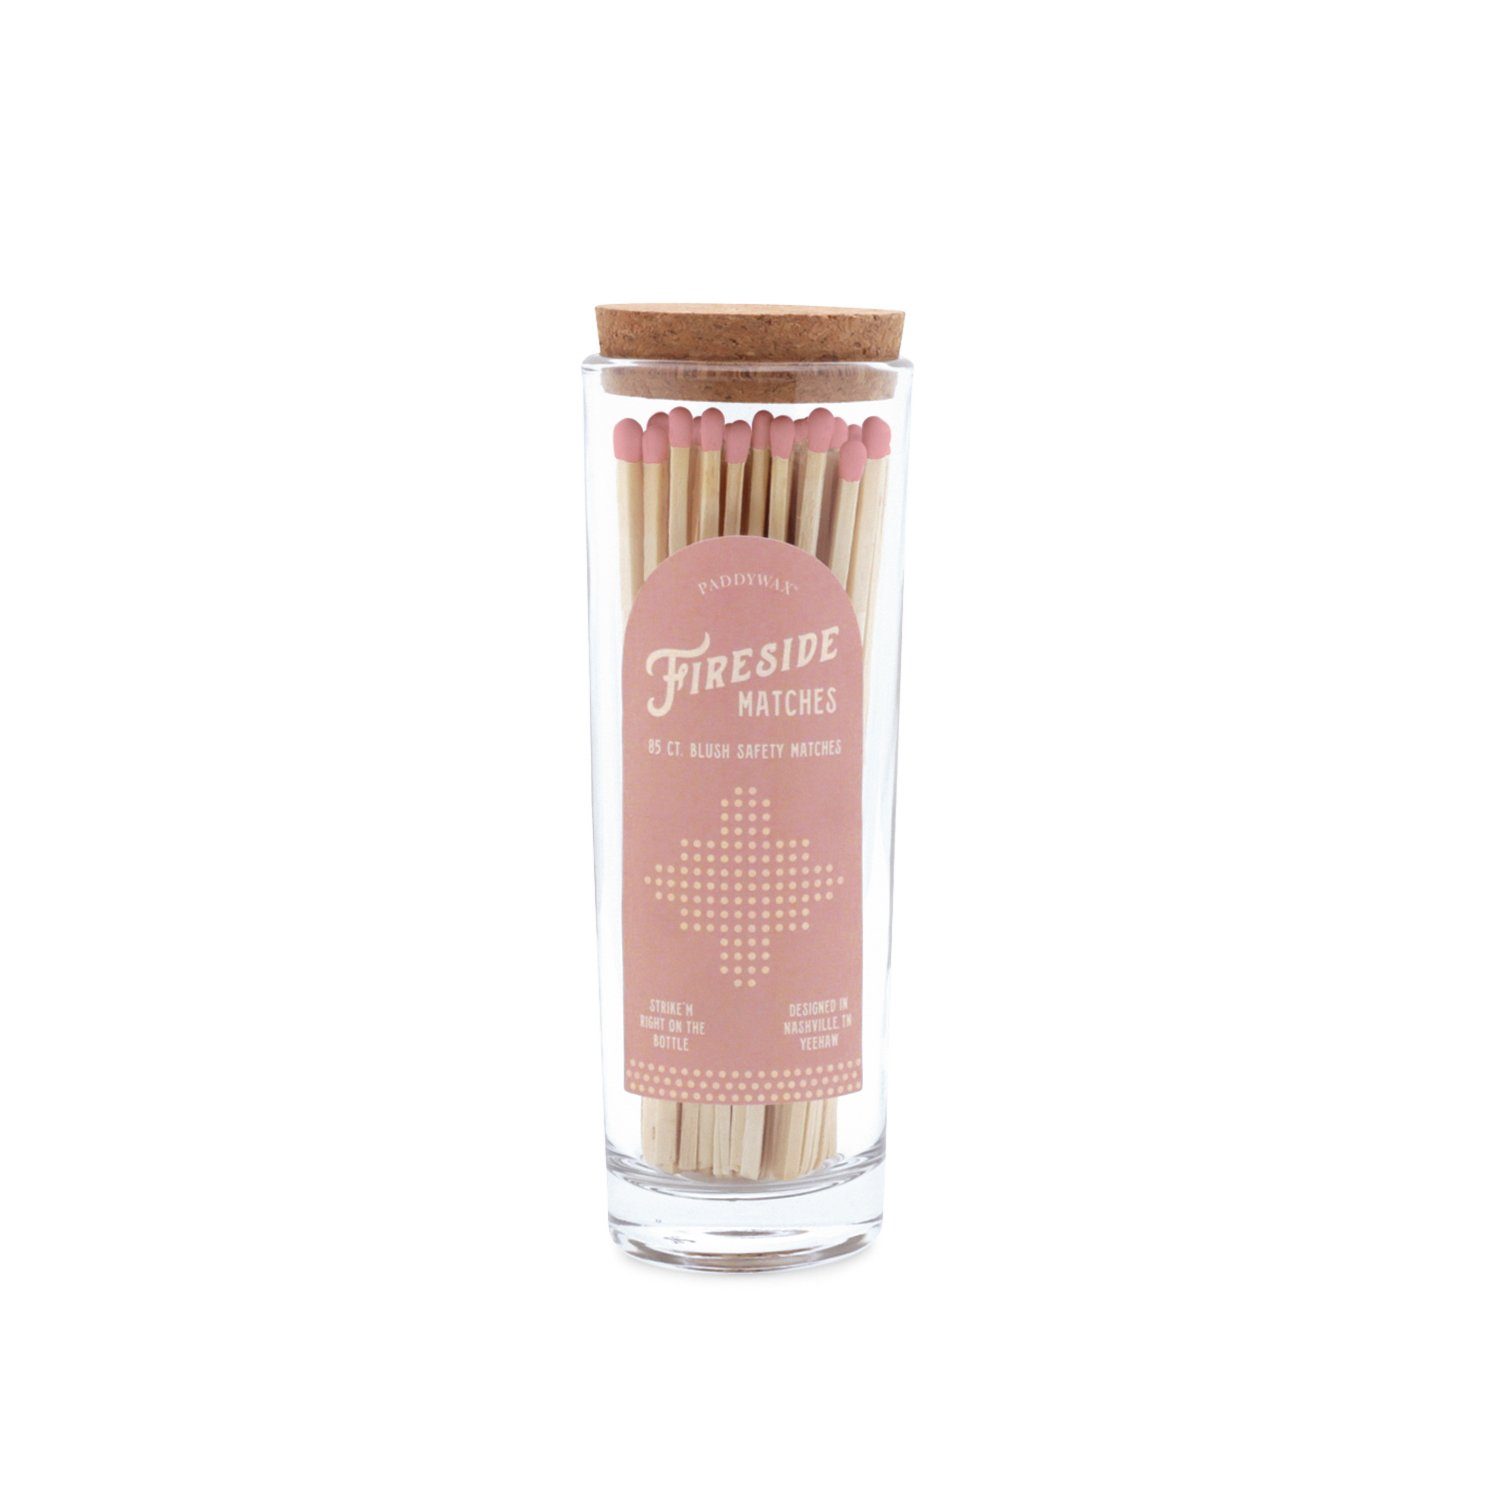 5.25" pink-tipped matches in tall glass tube with cork stopper; pink label on the side reads “Fireside Matches”; 85 matches inside